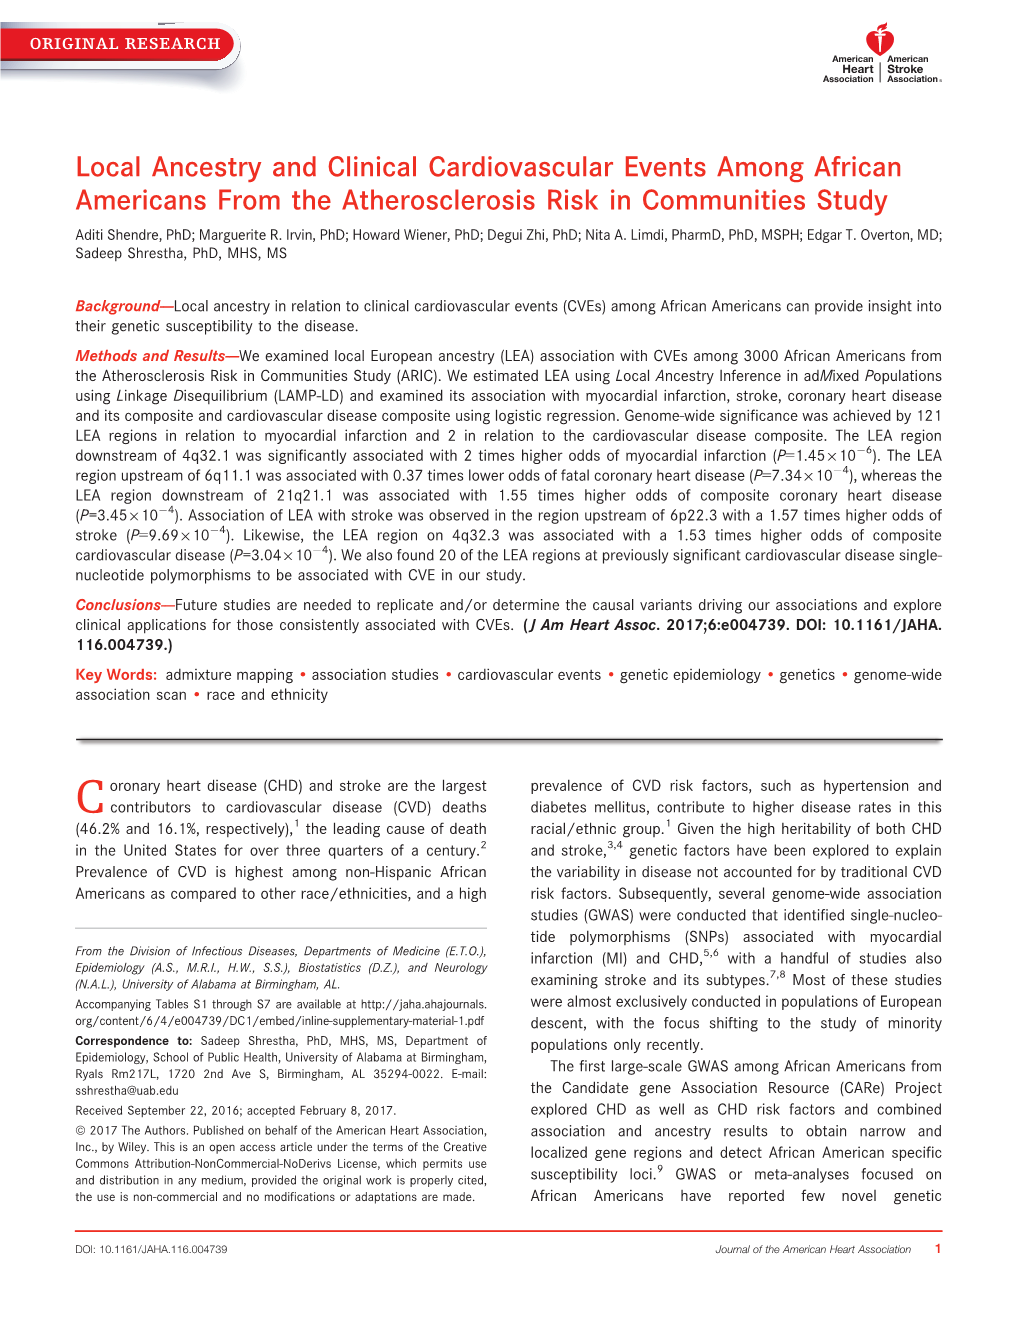 Local Ancestry and Clinical Cardiovascular Events Among African Americans from the Atherosclerosis Risk in Communities Study Aditi Shendre, Phd; Marguerite R